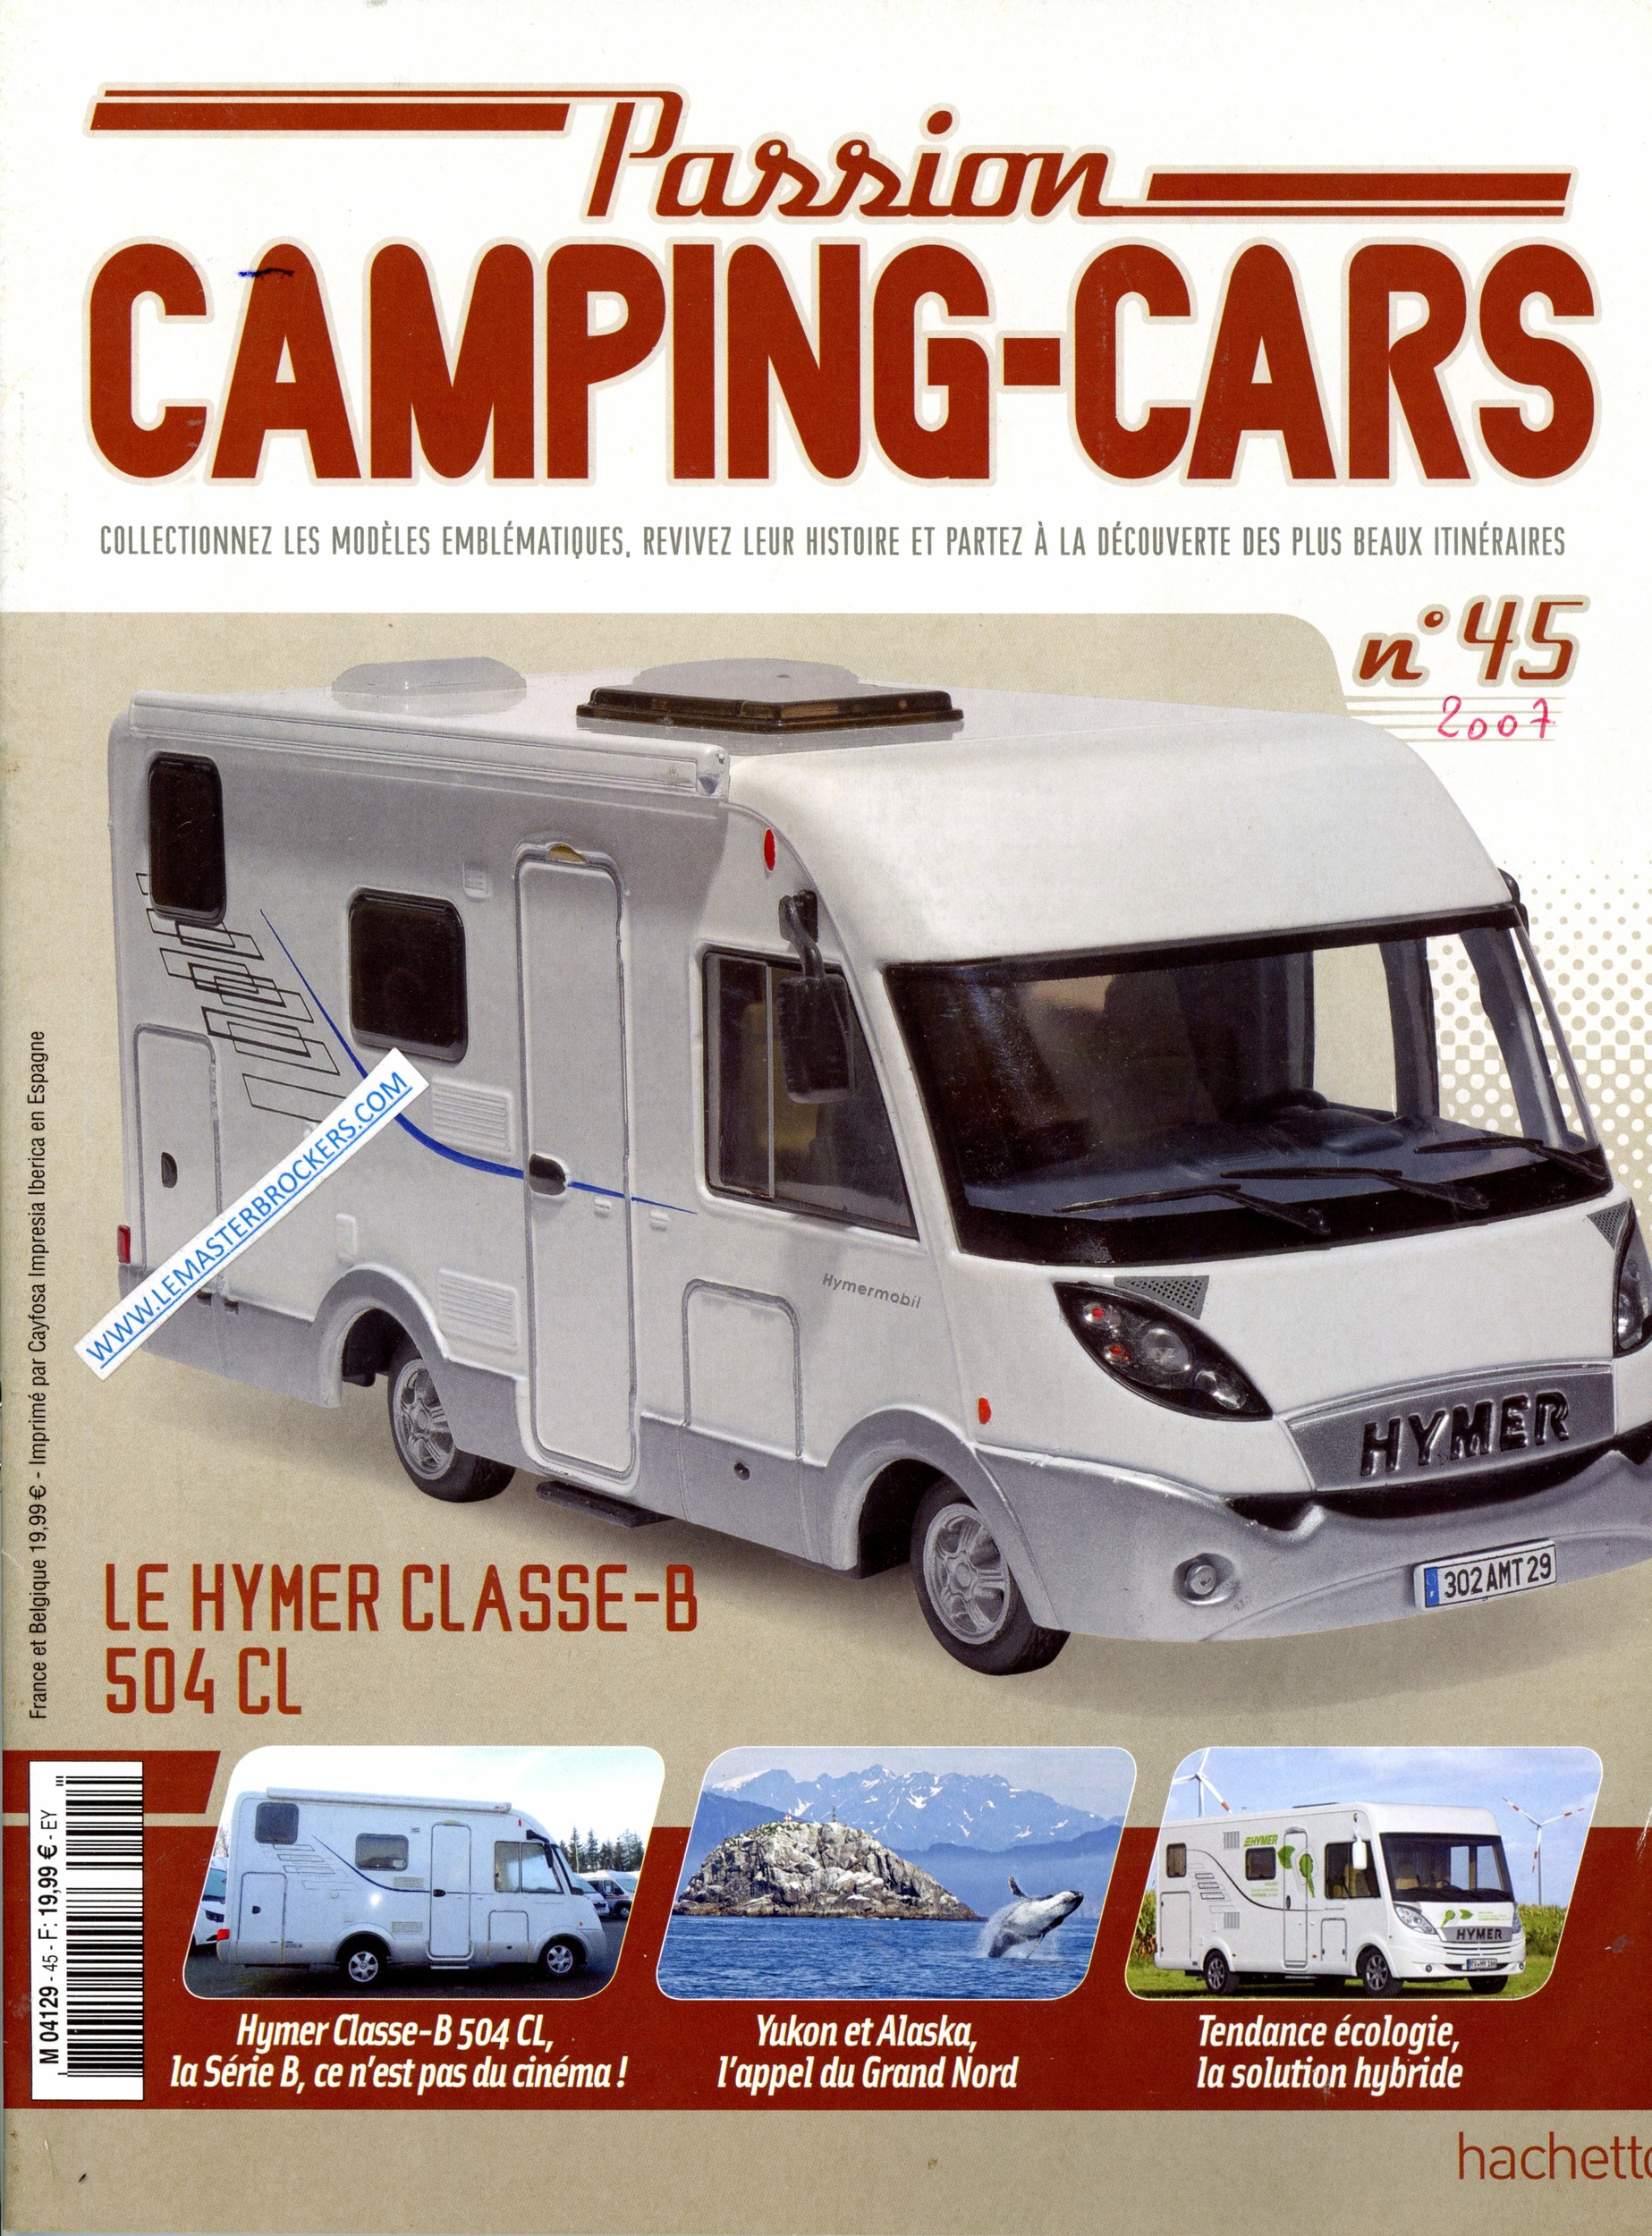 HYMER CLASSE B 504 CL PASSION CAMPING-CARS